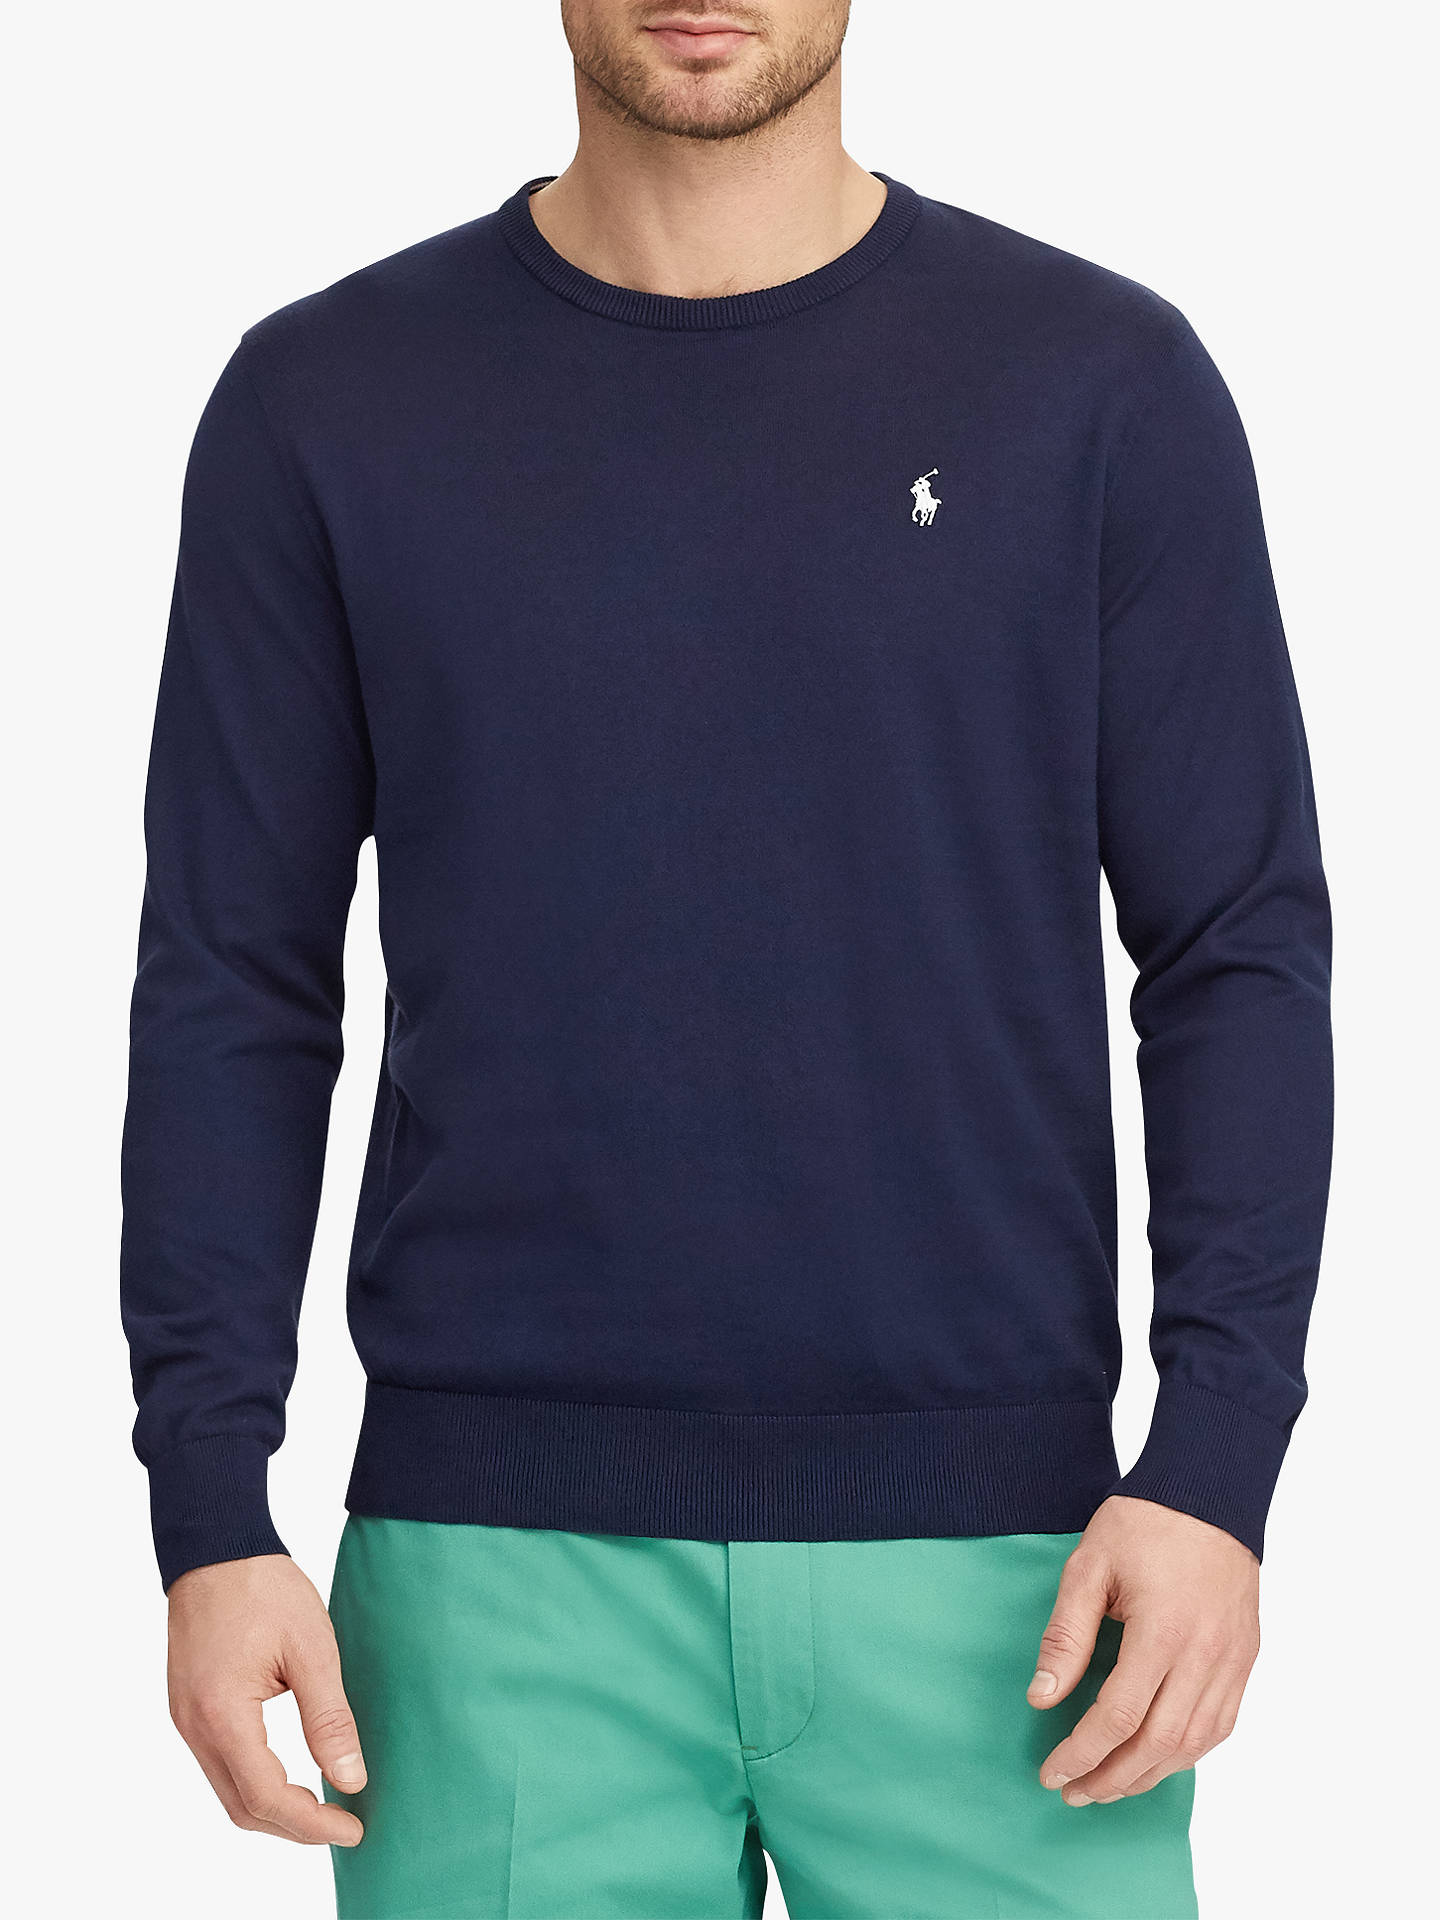 Polo Golf by Ralph Lauren Crew Neck Jumper, French Navy at John Lewis ...